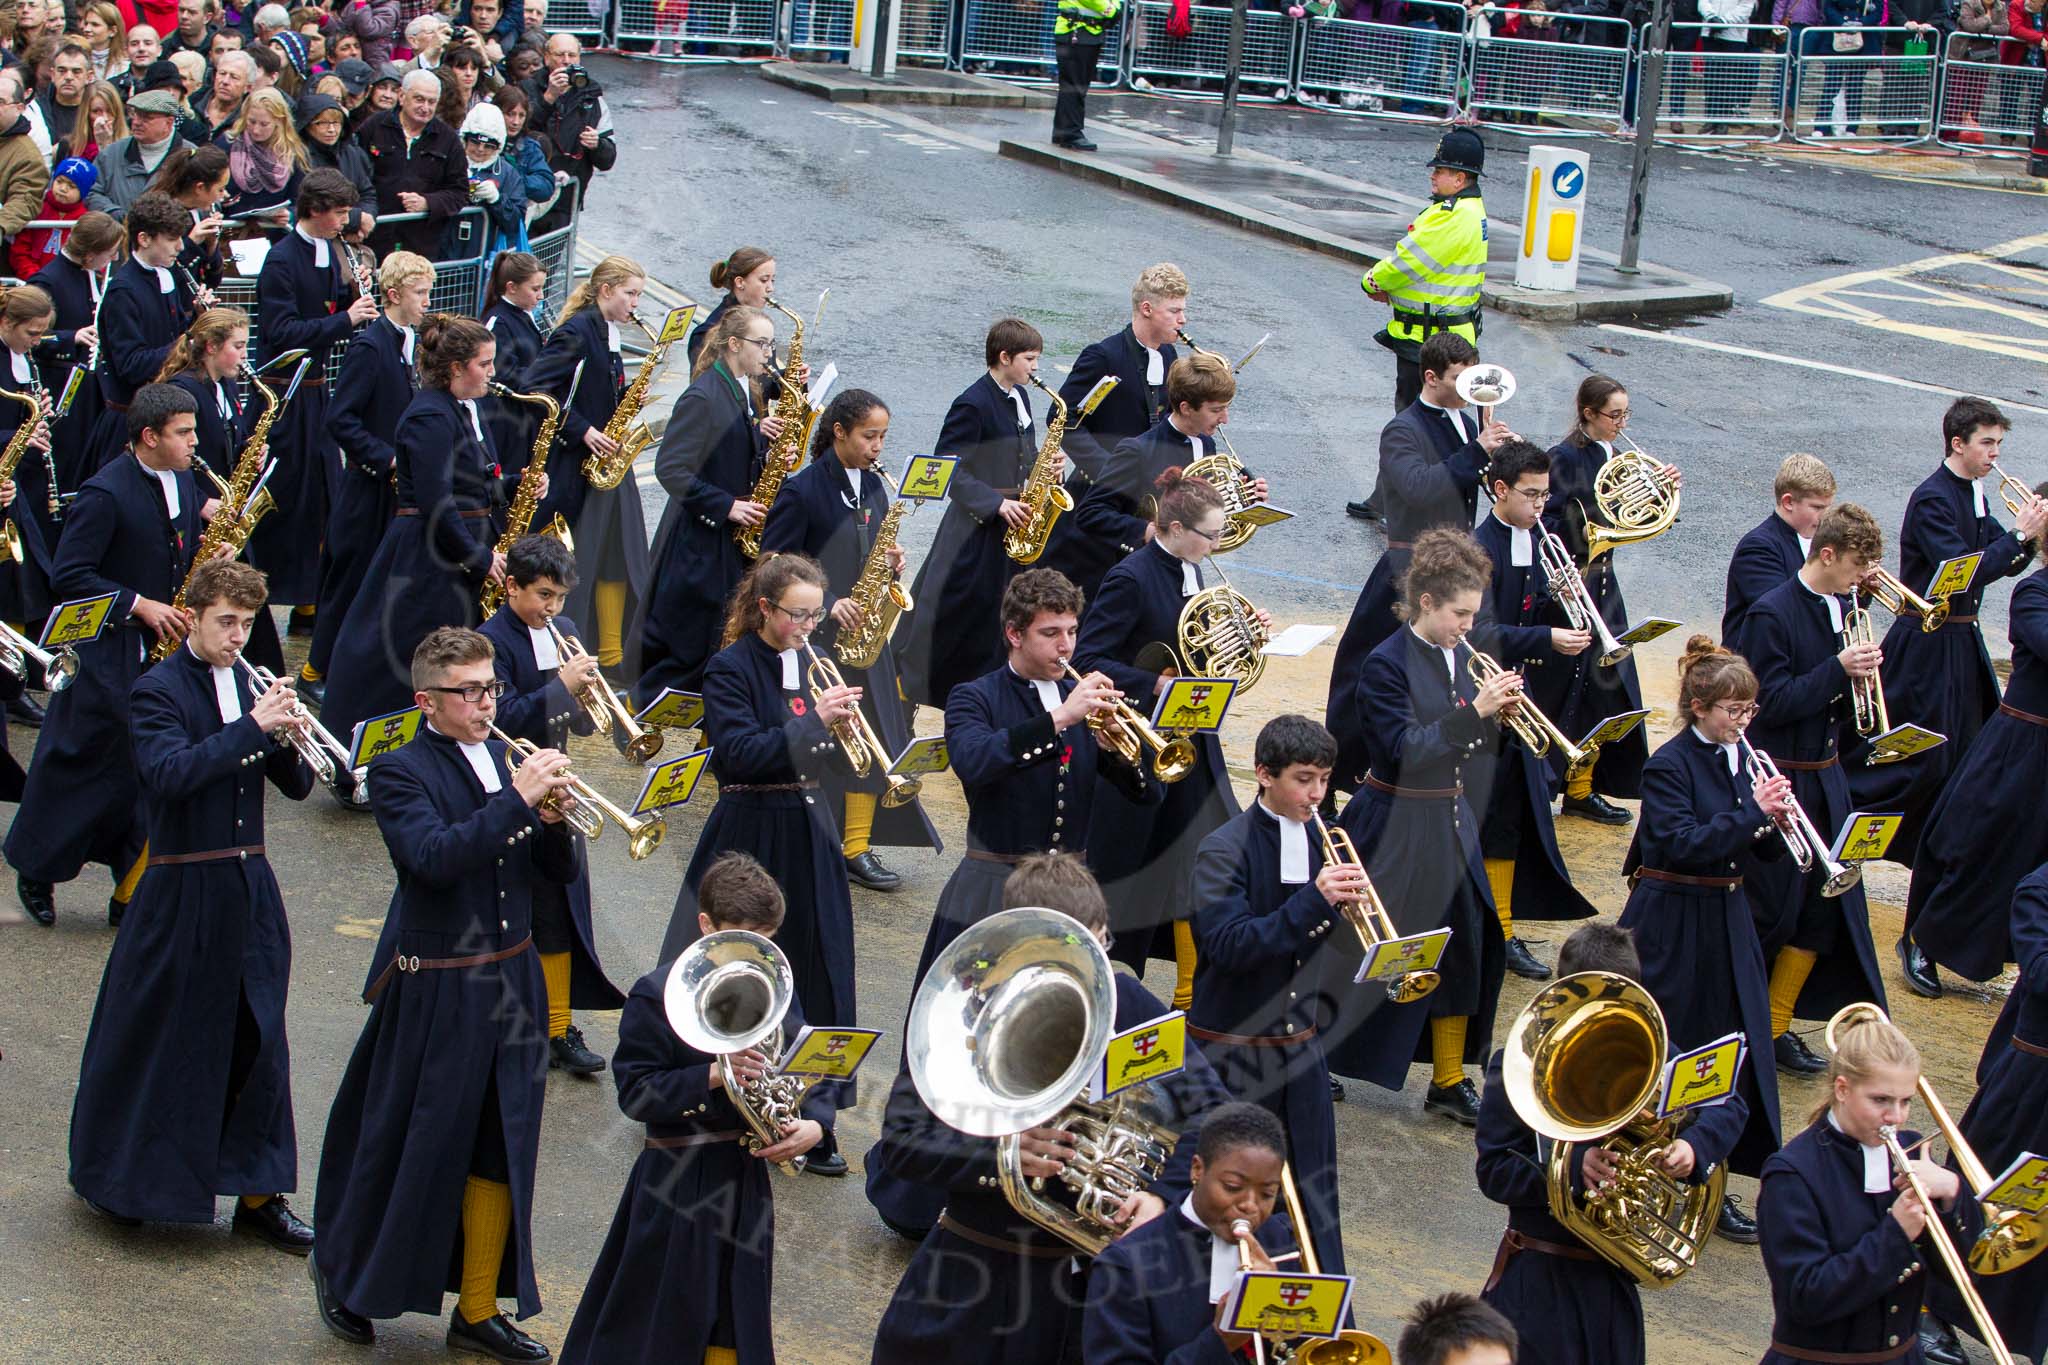 Lord Mayor's Show 2012: Entry 123 - Christ's Hospital School Band..
Press stand opposite Mansion House, City of London,
London,
Greater London,
United Kingdom,
on 10 November 2012 at 12:02, image #1772